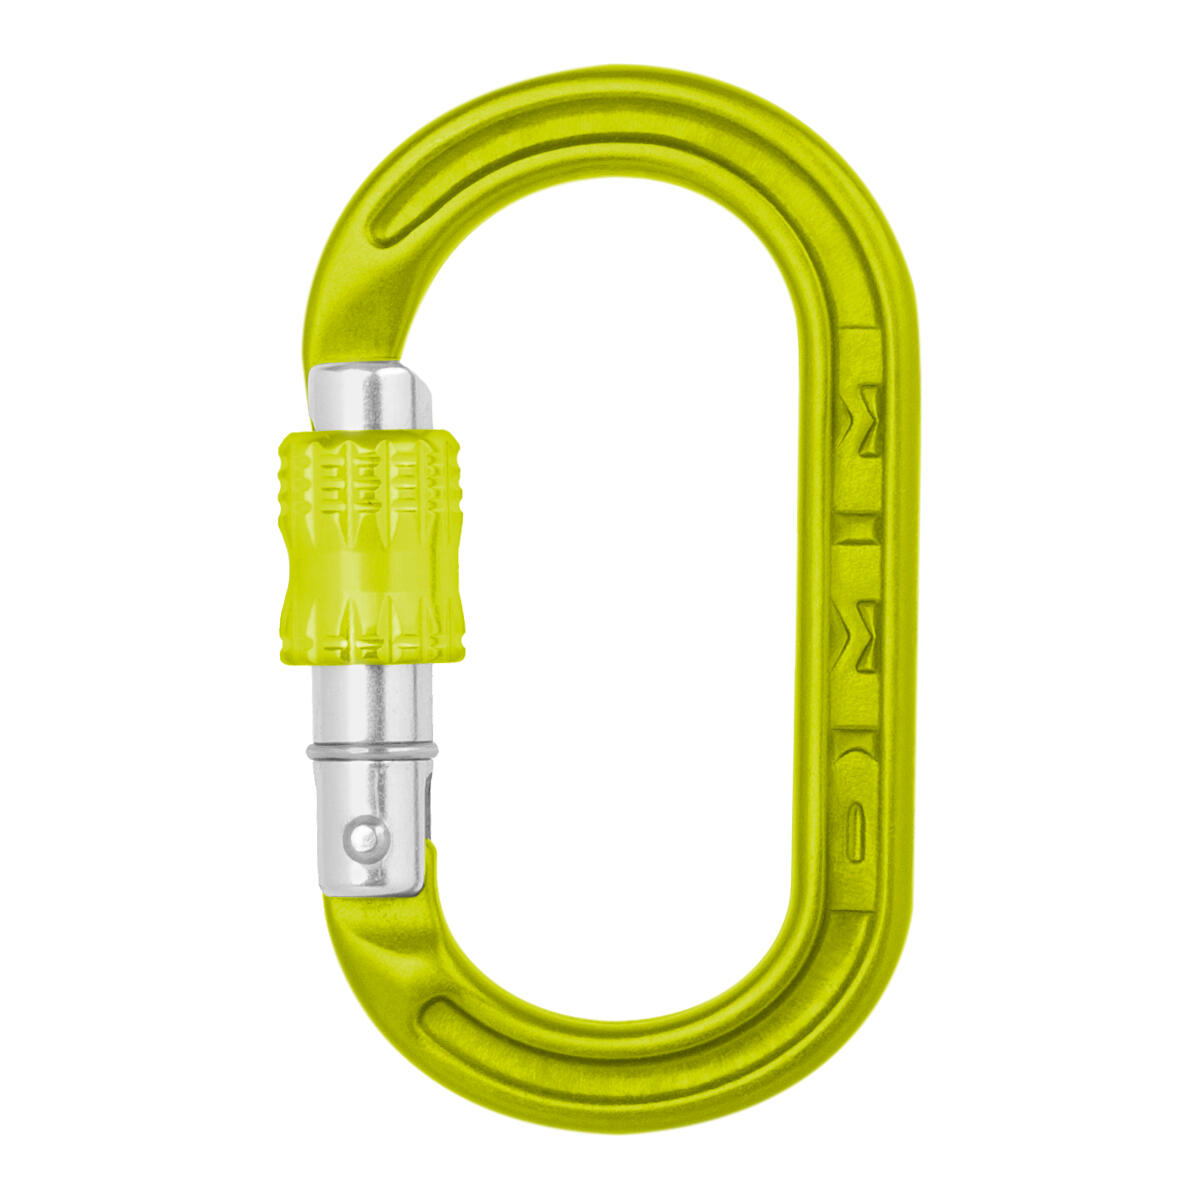 DMM XSRE Lock Accessory Carabiner - Lime